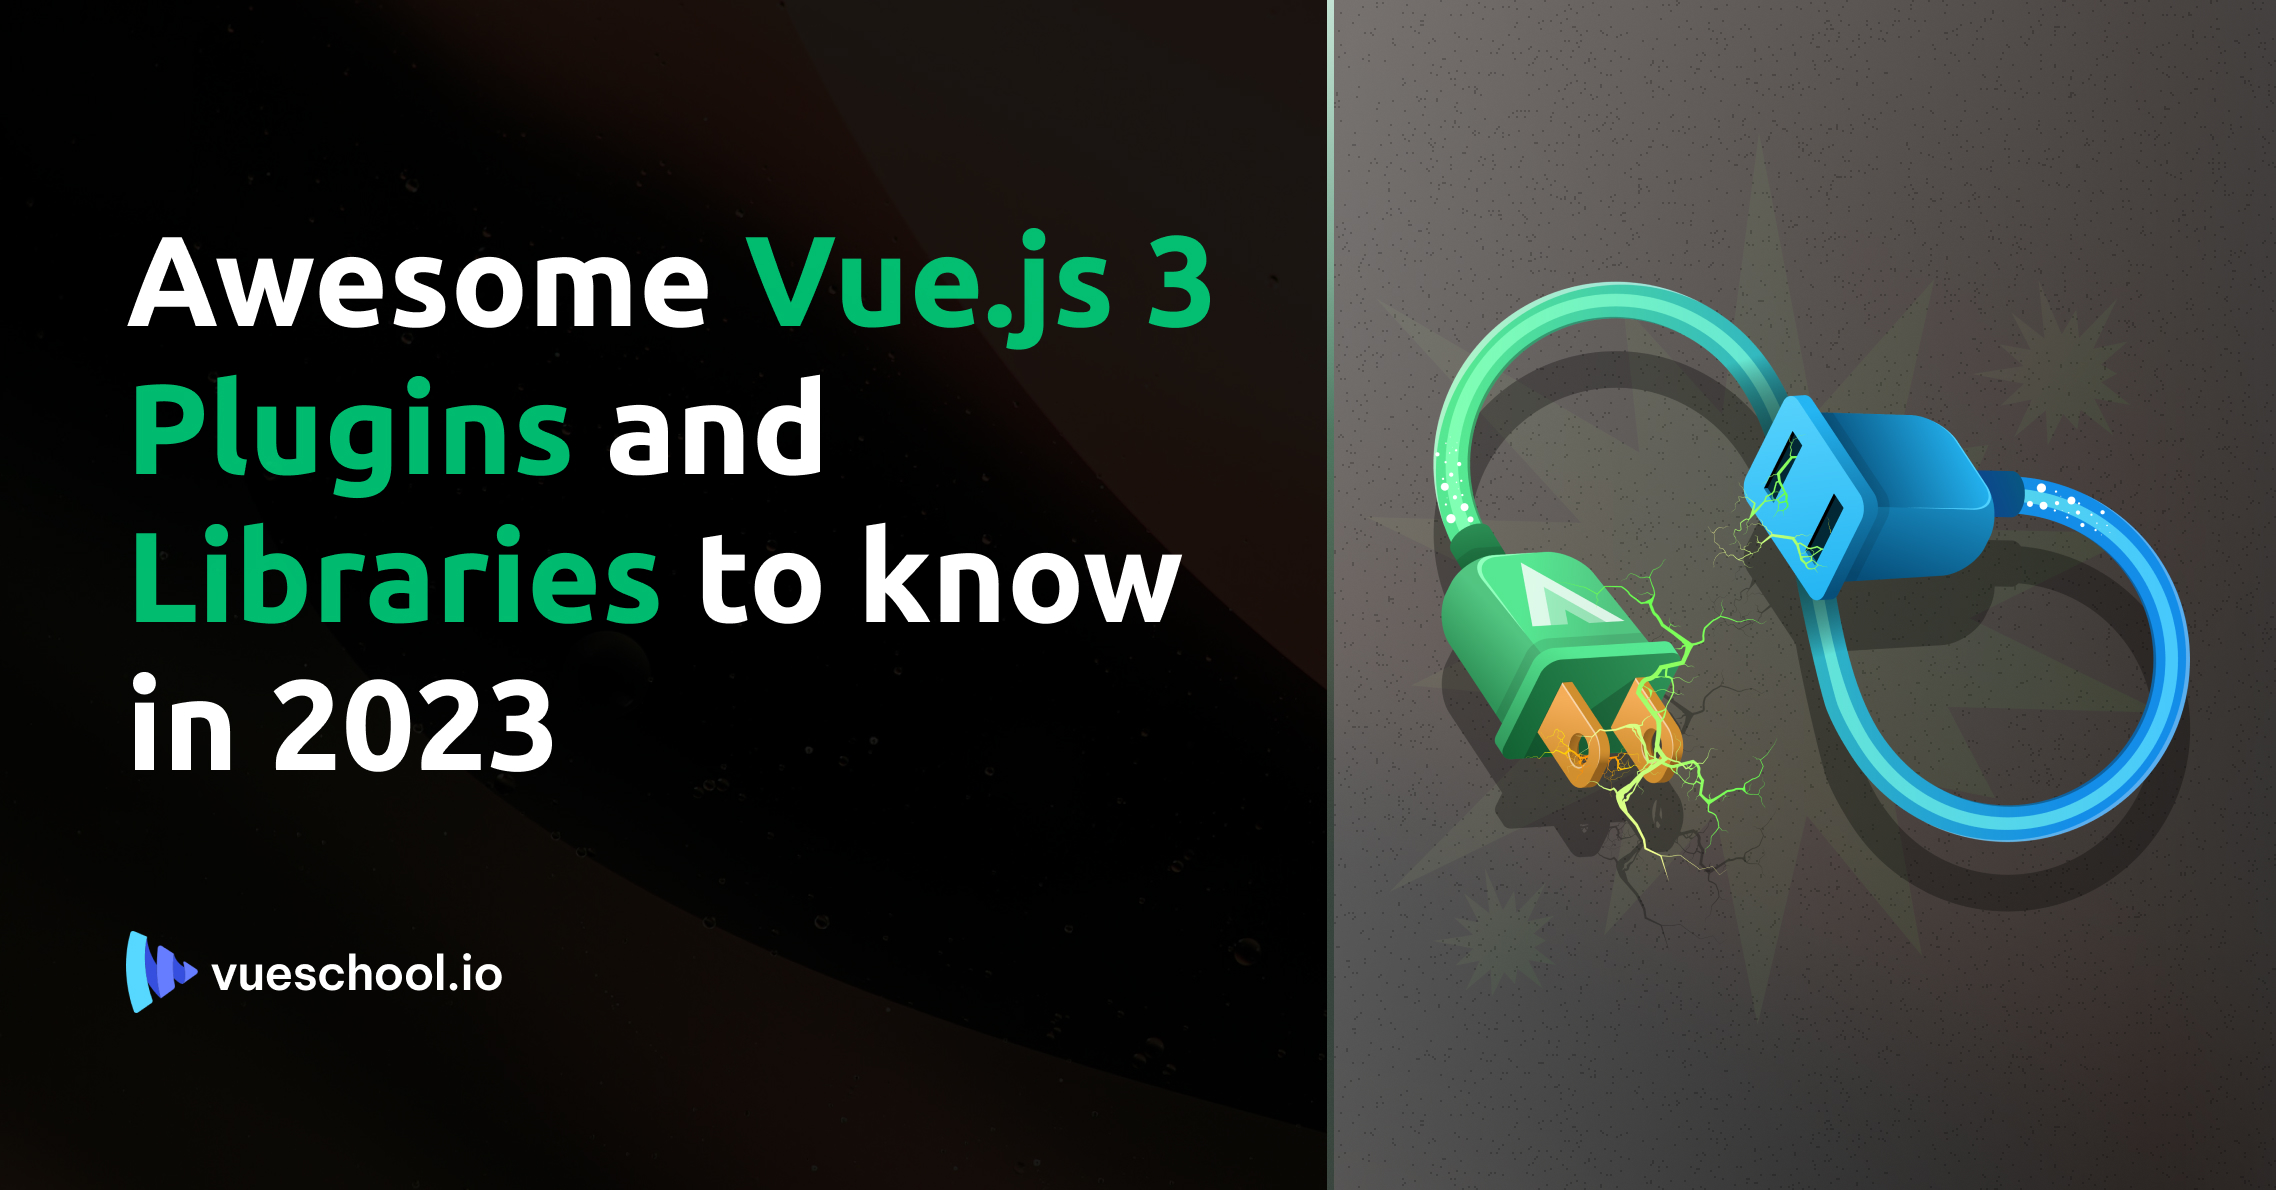 7 Awesome Vue.js 3 Plugins and Libraries to know in 2023